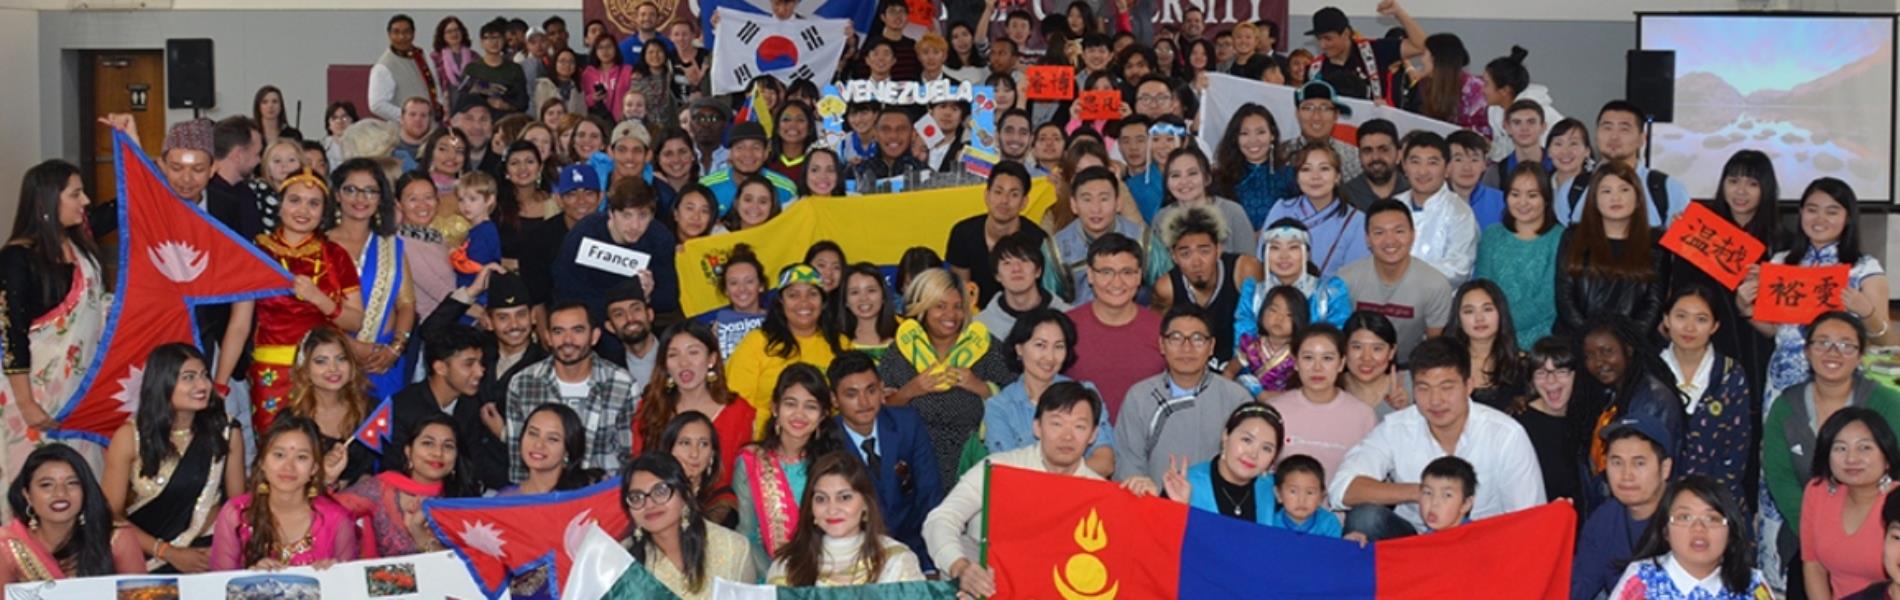 CU int'l students and flags